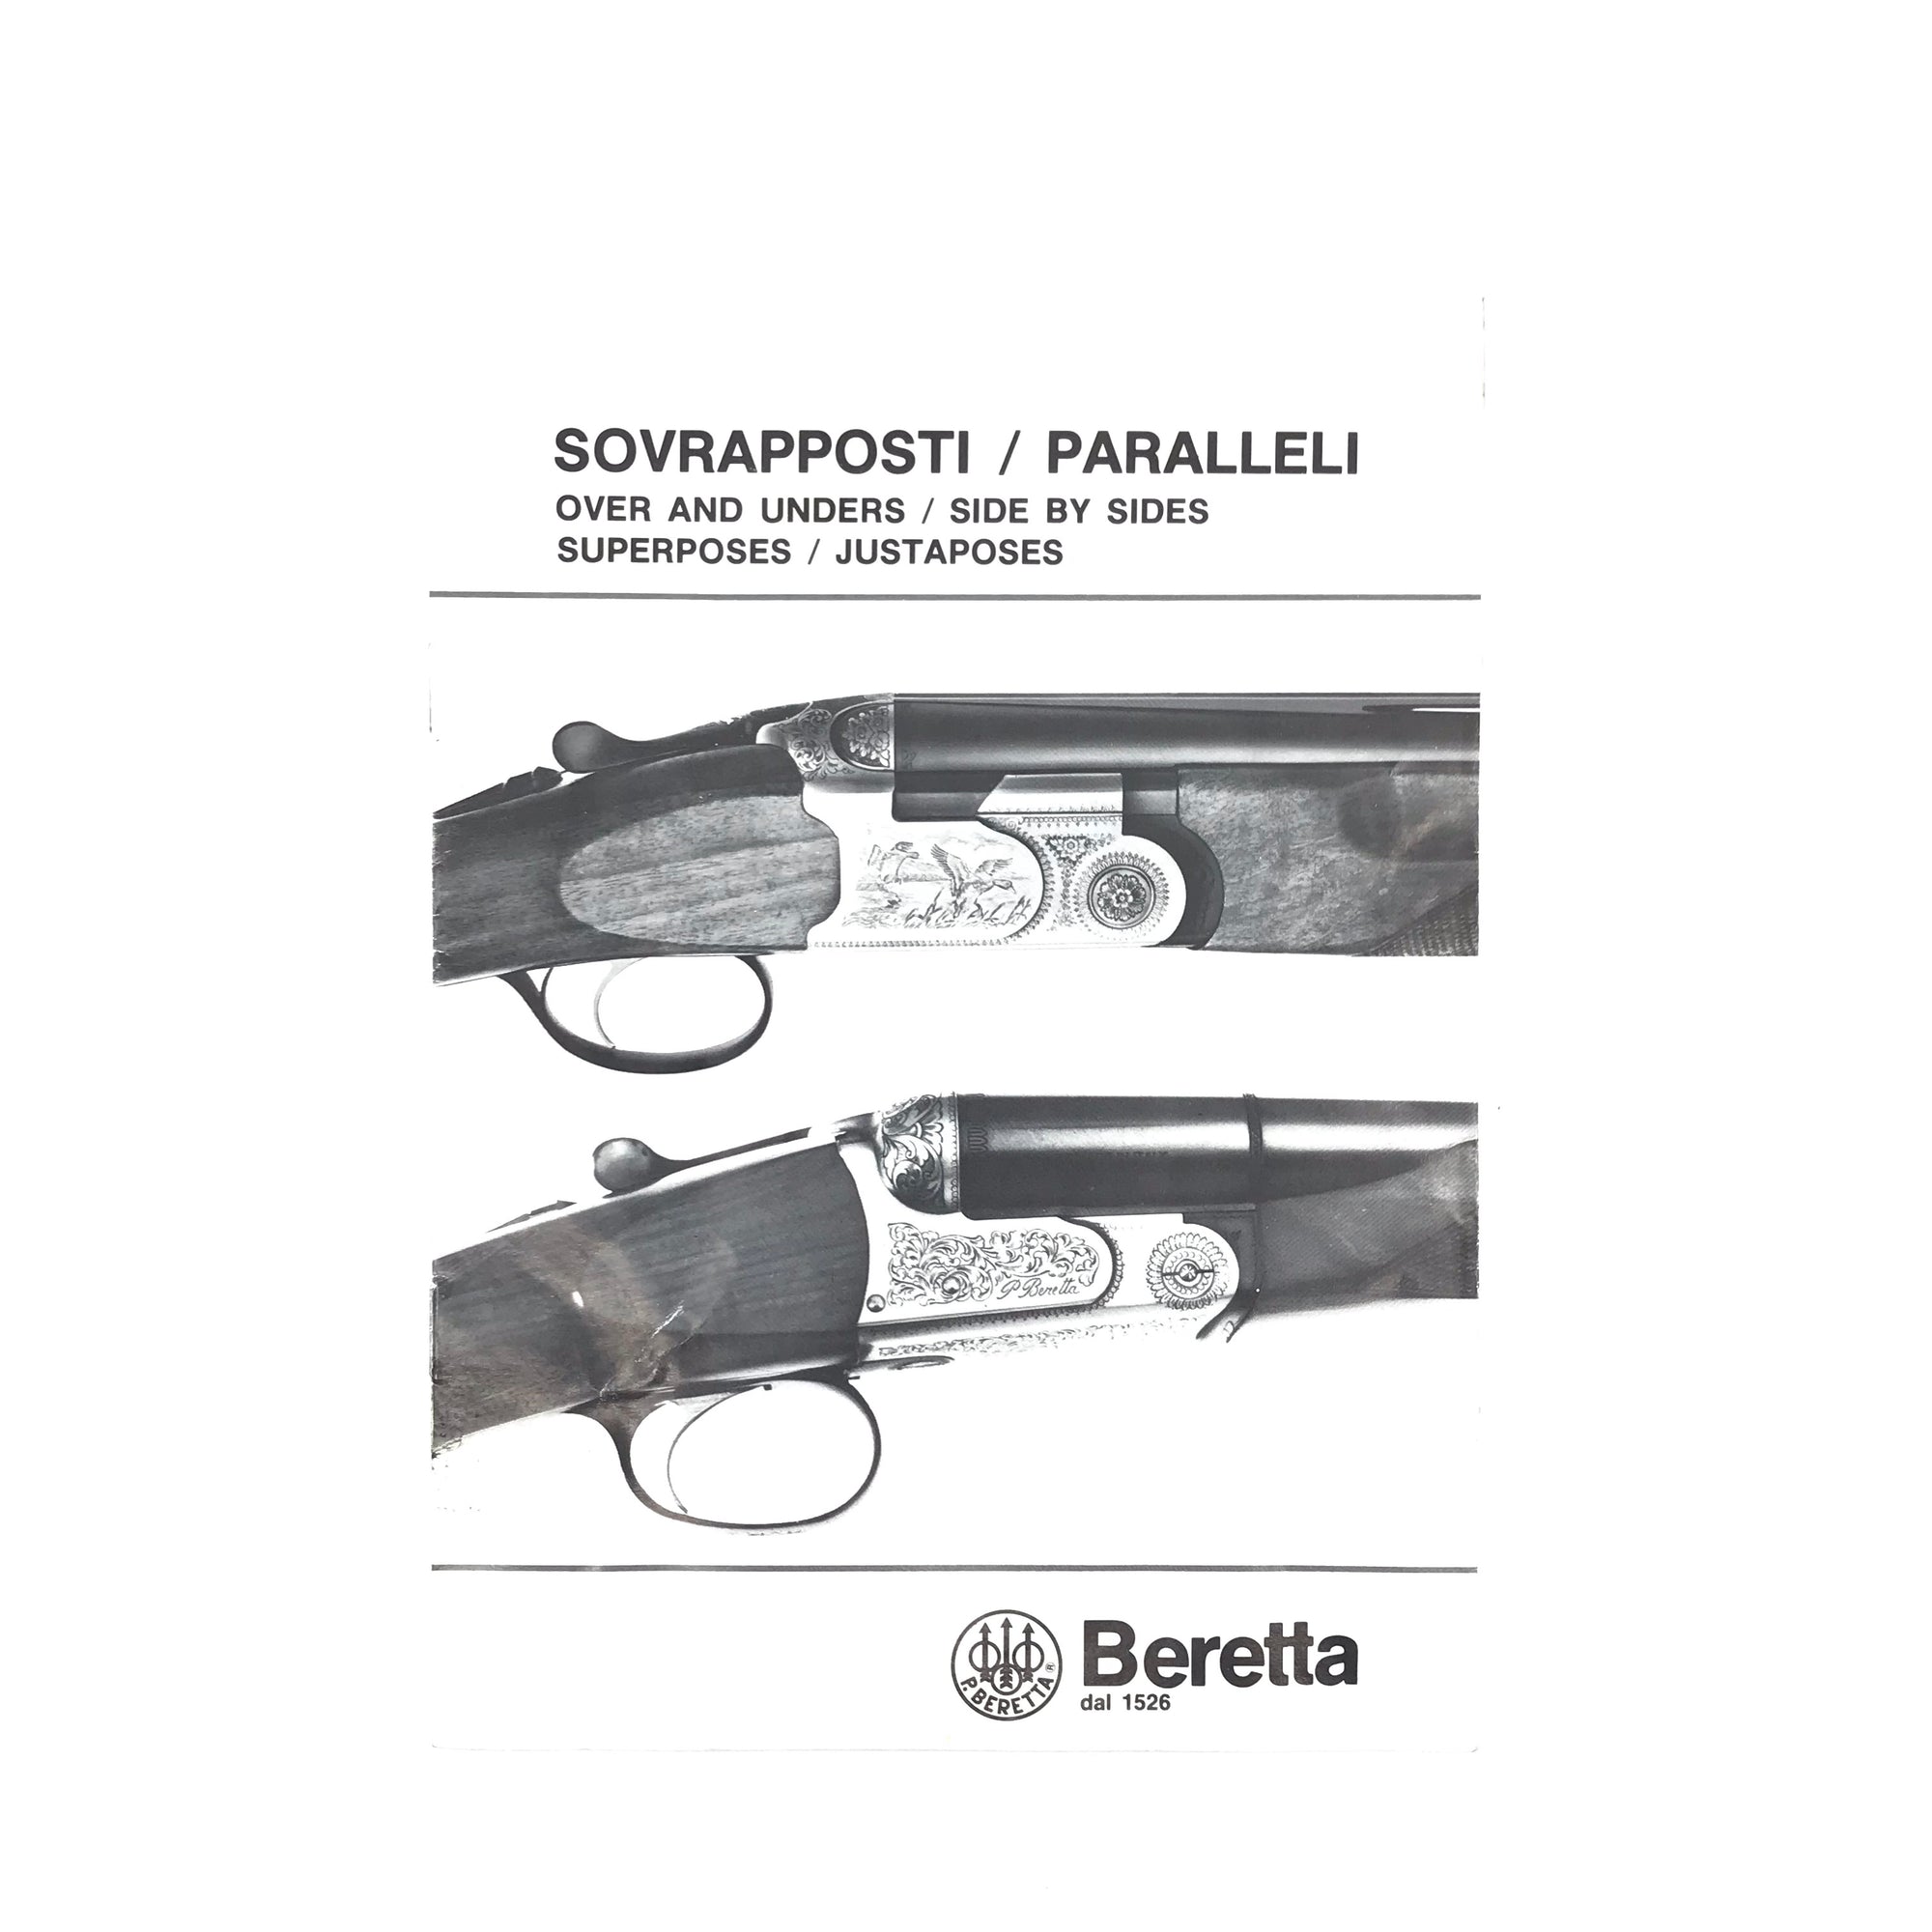 Beretta Sovrapposti/Paralleli Over & Unders / Side by Sides Instruction Manual